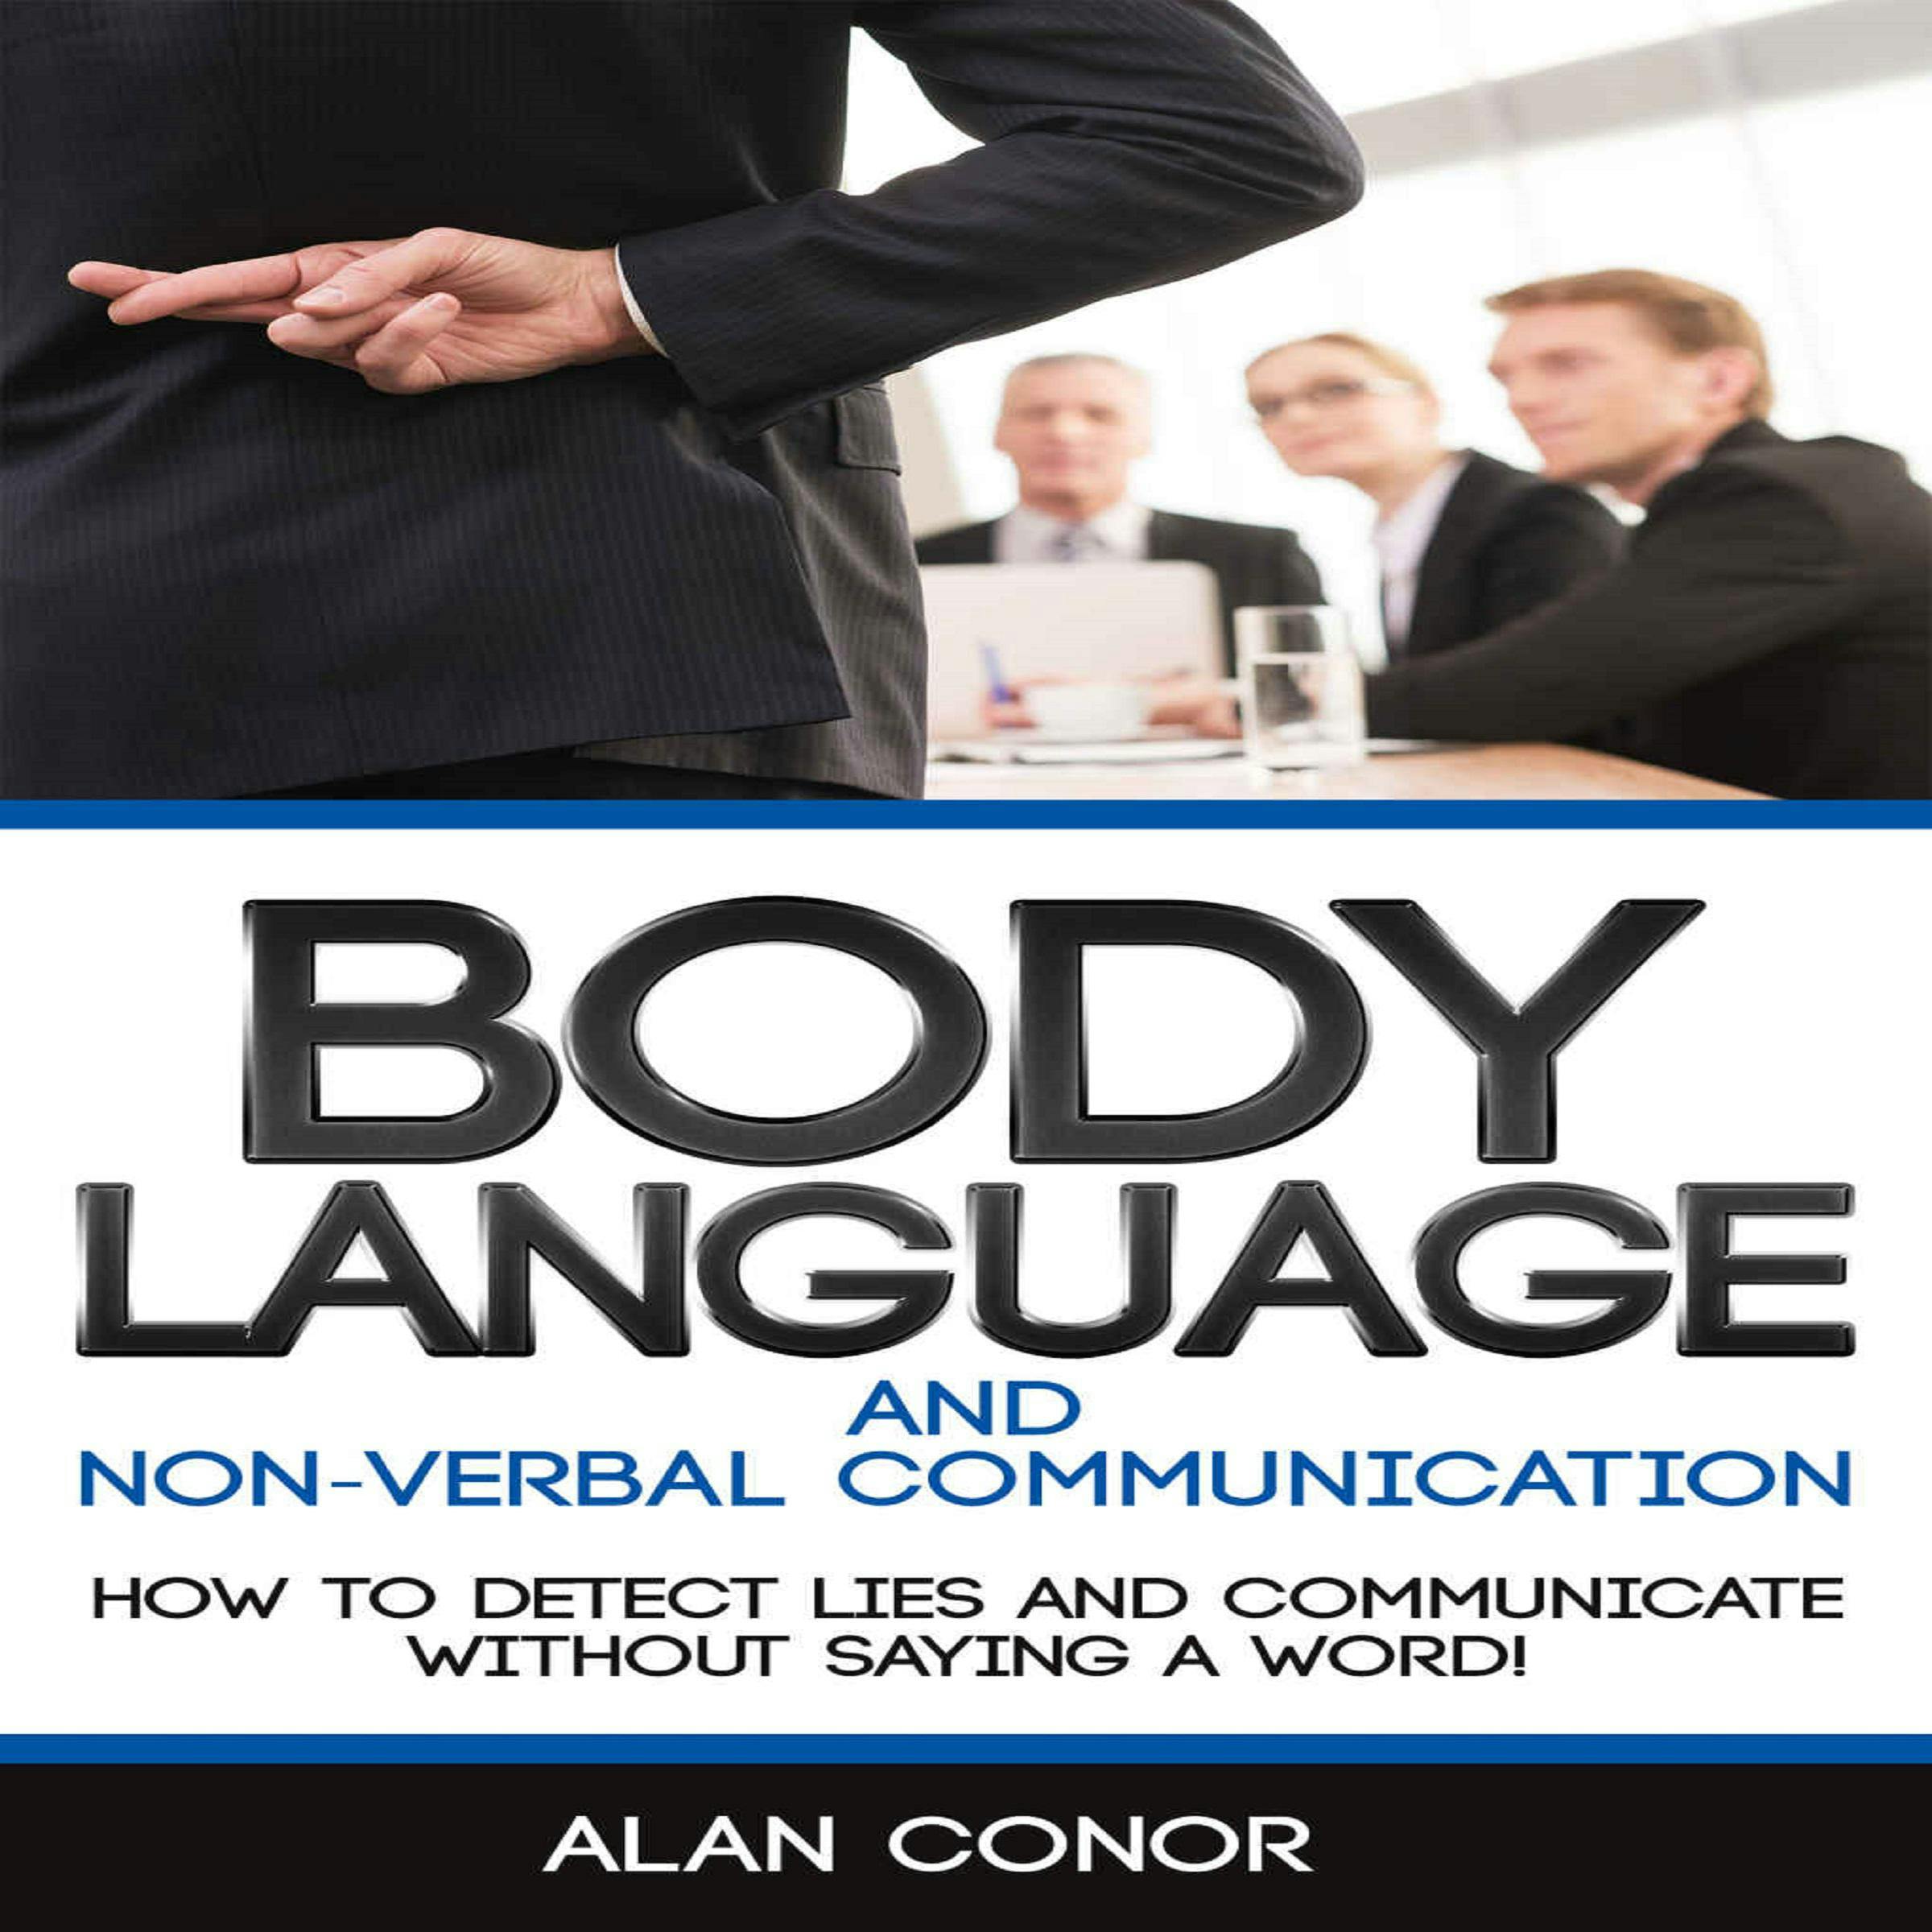 Body Language:Body Language And Non-Verbal Communication: How To Detect Lies And Communicate Without Saying A Word - Alan Conor